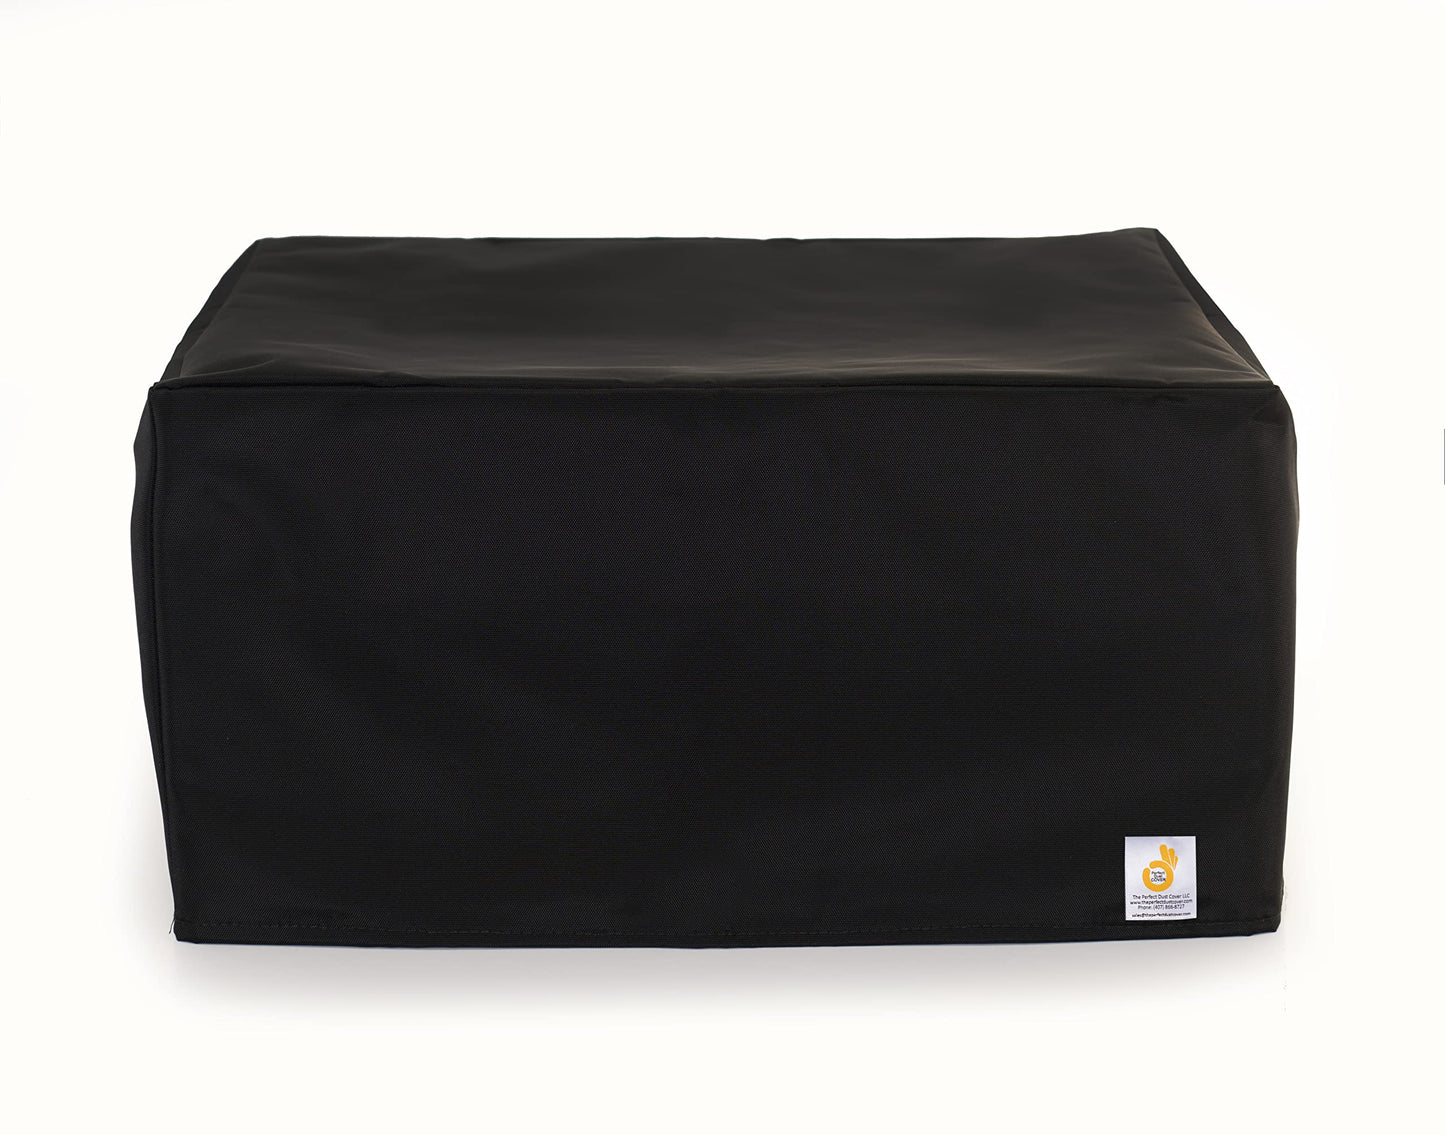 The Perfect Dust Cover, Black Nylon Cover Compatible with Epson WorkForce Pro WF-M4619 Monochrome Printer, Anti Static, Double Stitched and Waterproof Dust Cover Dimensions 16.7''W x 15.3''D x 10.9''H by The Perfect Dust Cover LLC